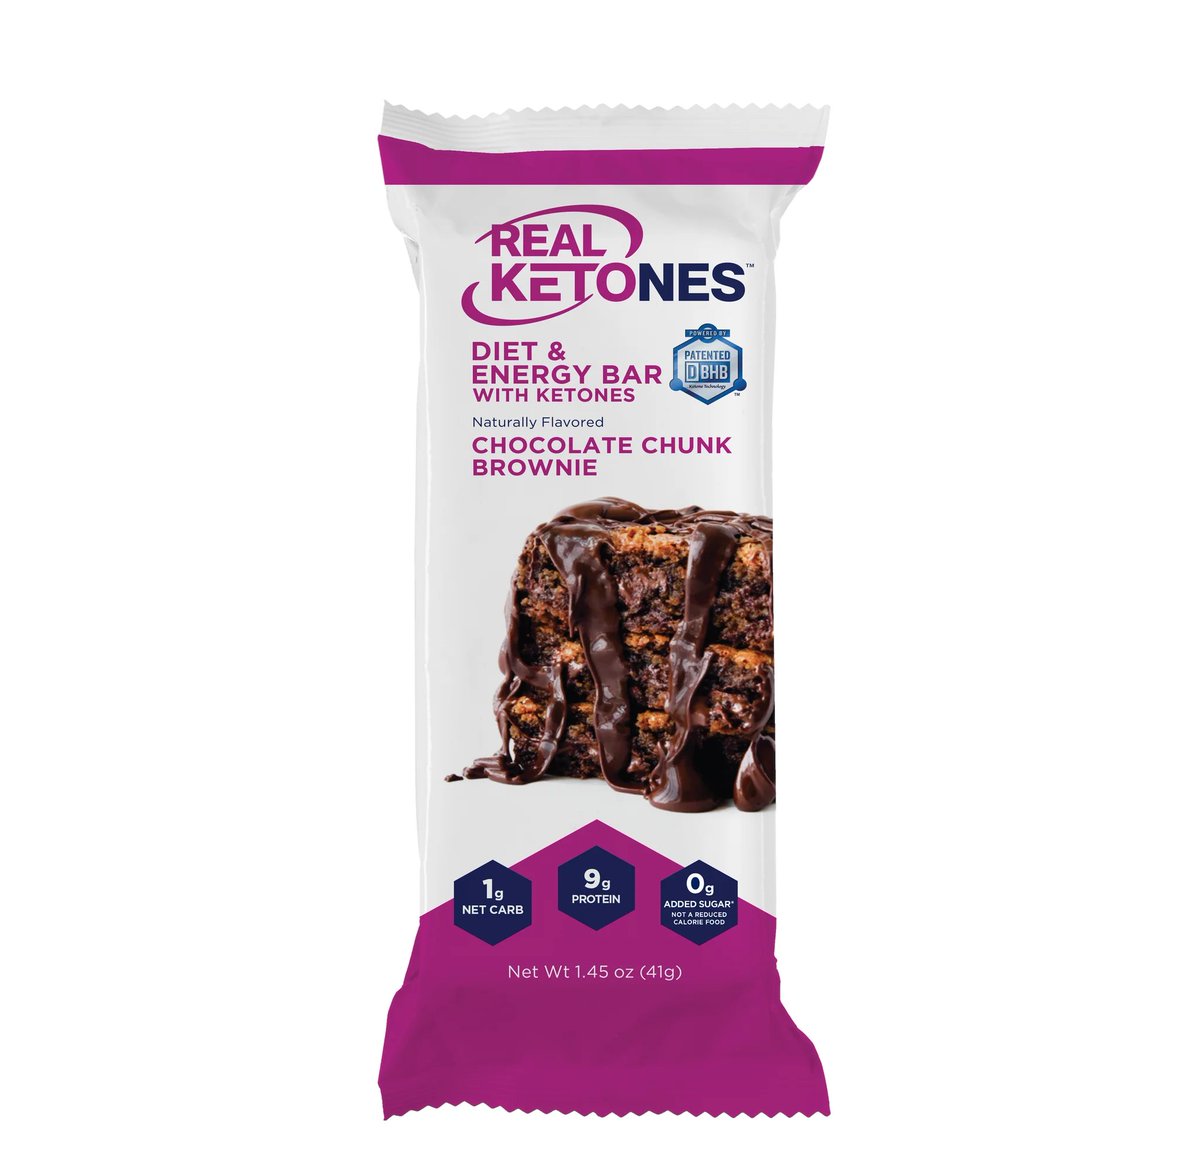 Real Ketones
Keto Meal Bars - 12 Pack
The Feel-Good Energy Bar Skip the gummy, sugar-filled bars for a grab-and-go option that you can feel good about.
click.linksynergy.com/link?id=3Jwrdk…' rel='nofollow